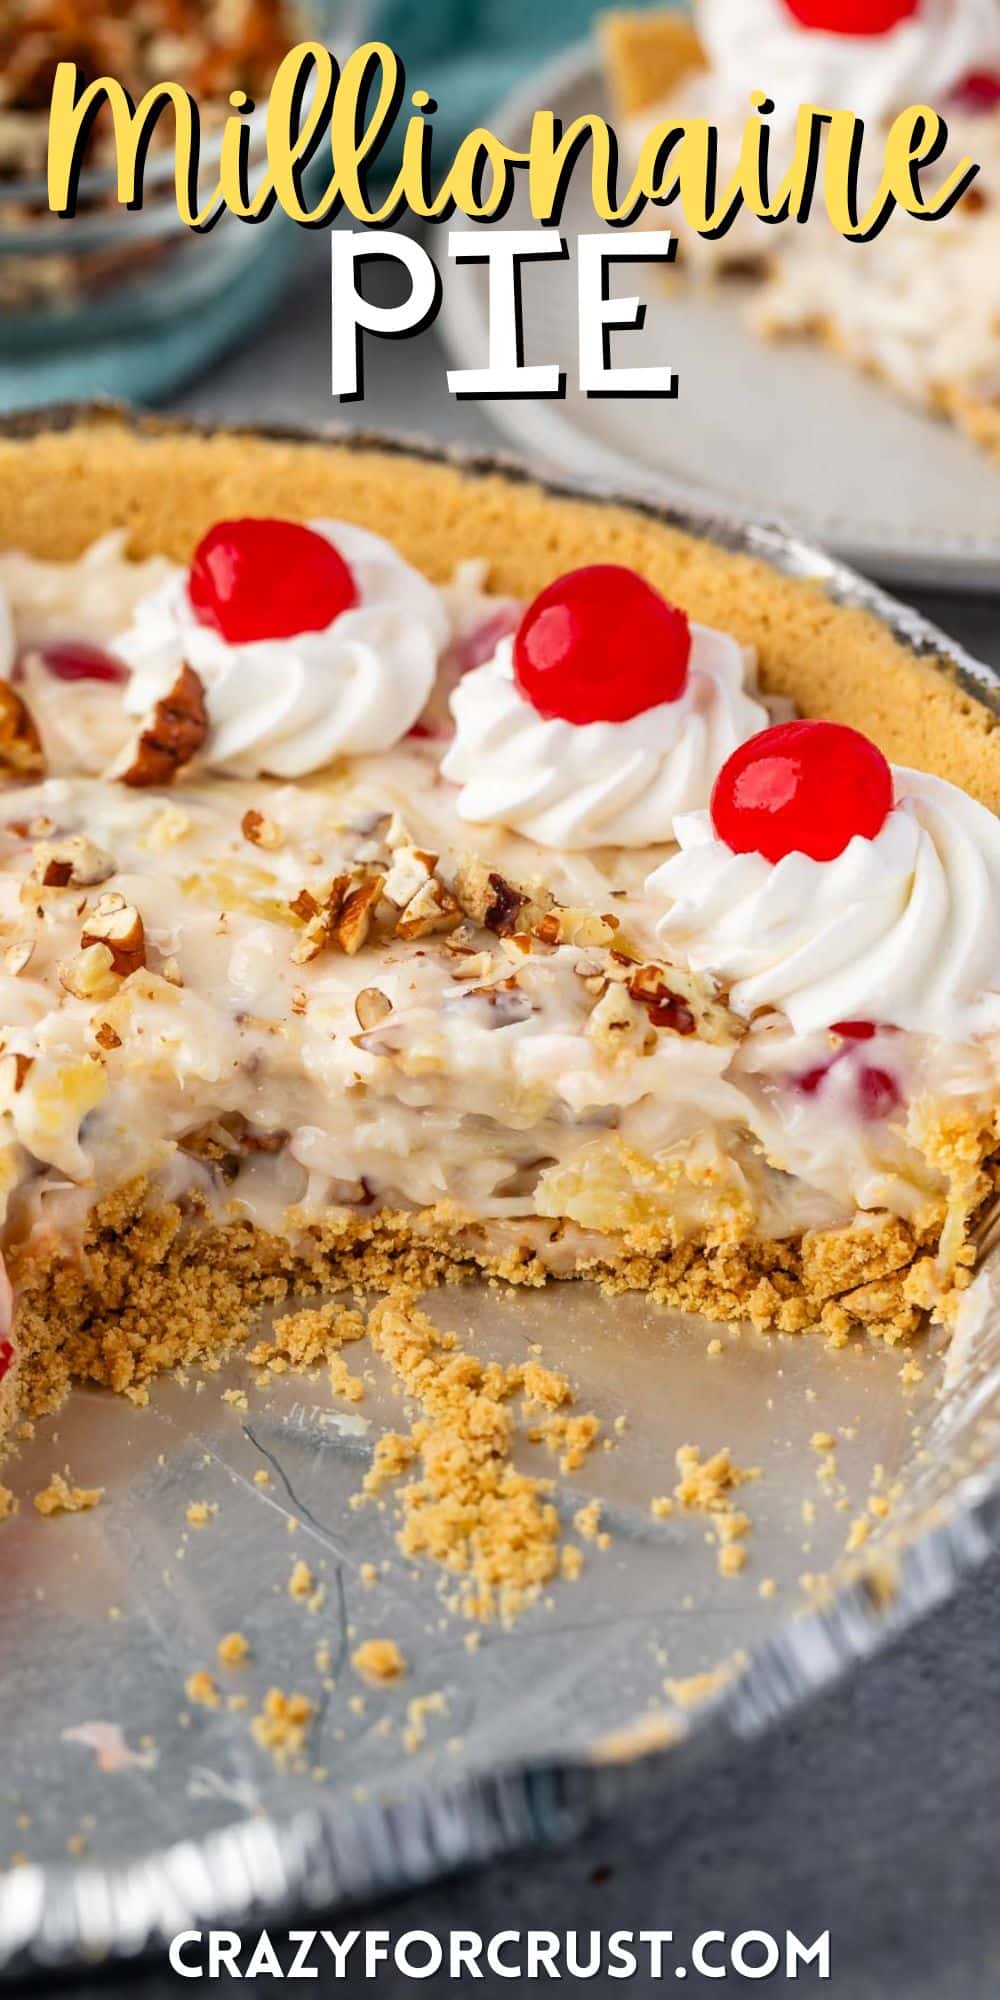 millionaire pie in a silver tin with pecans and cherries on top of the pie with words on the image.